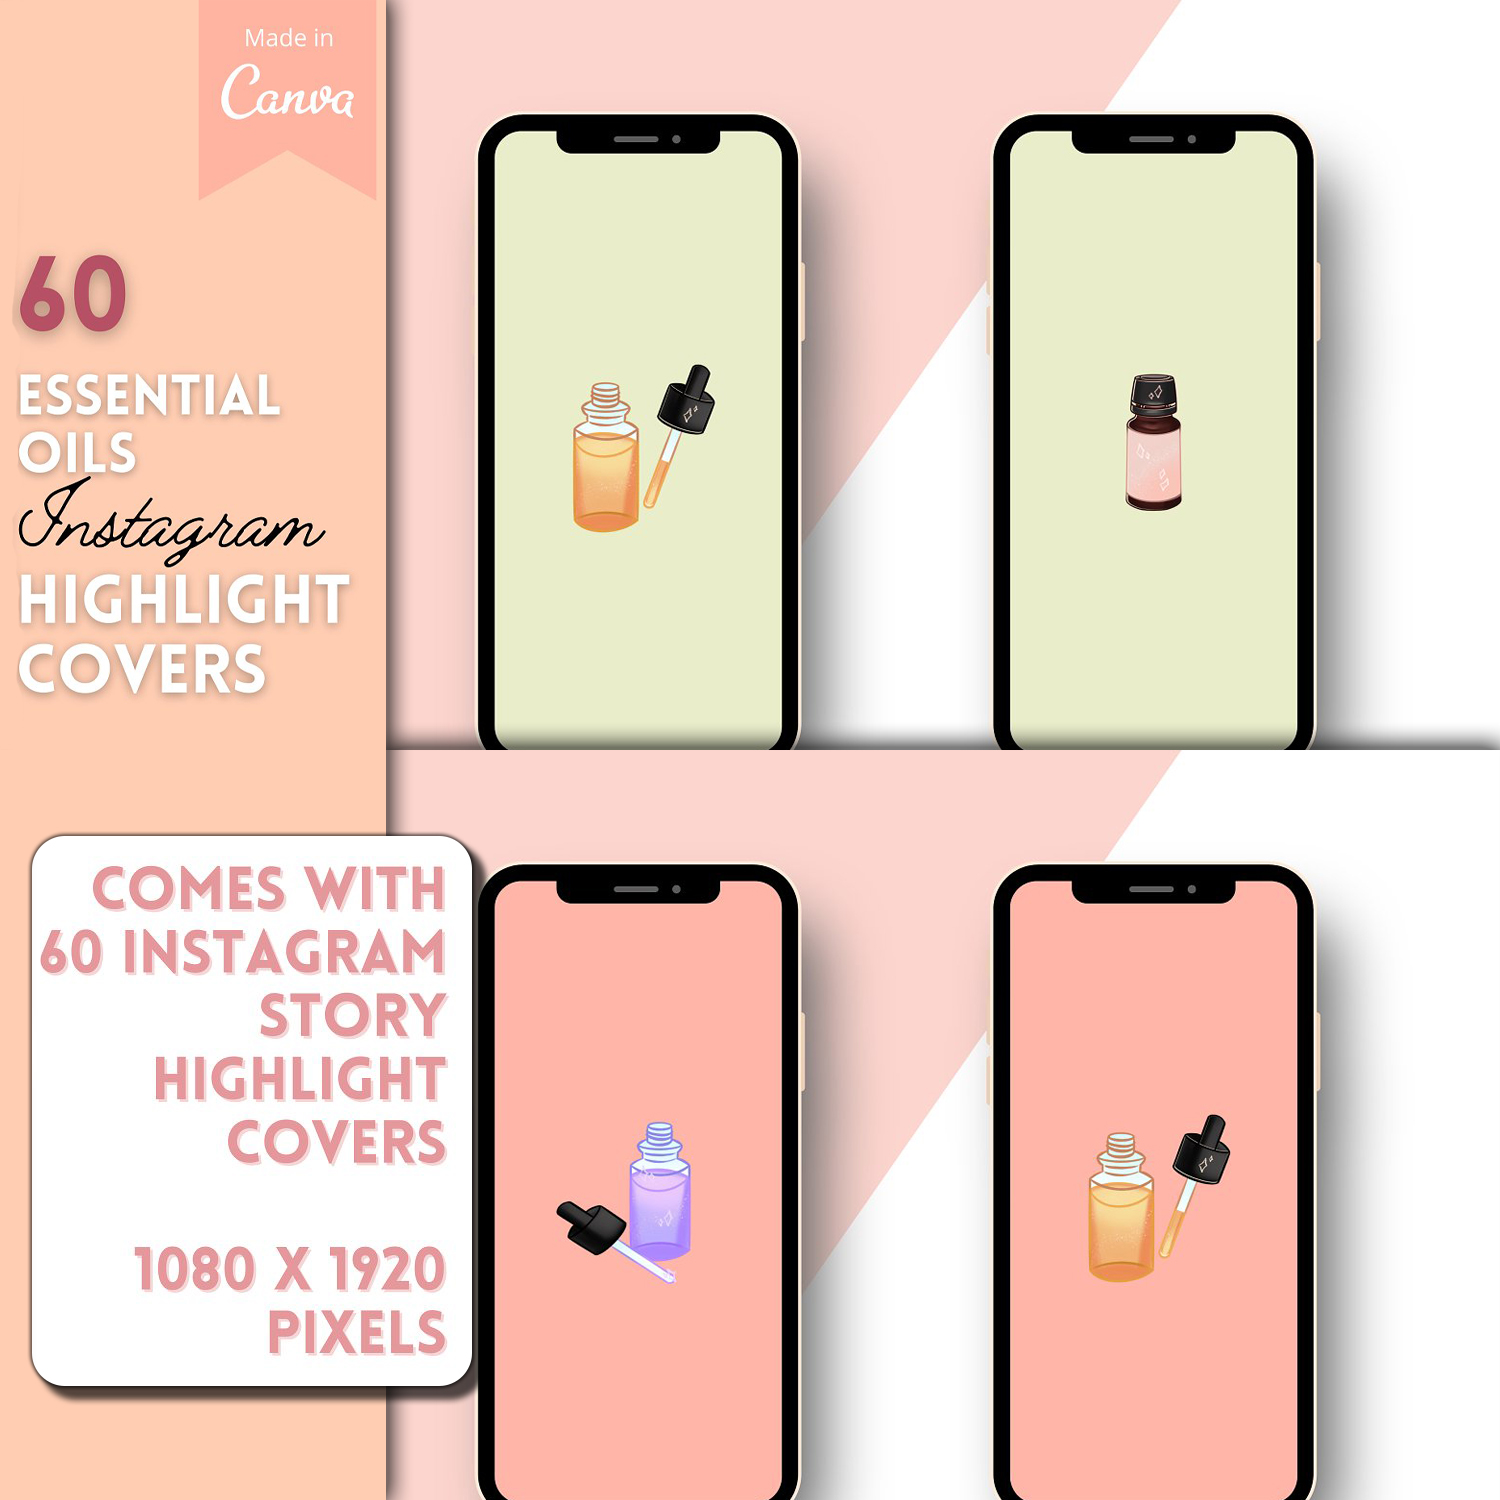 Preview essential oils ig highlight covers.